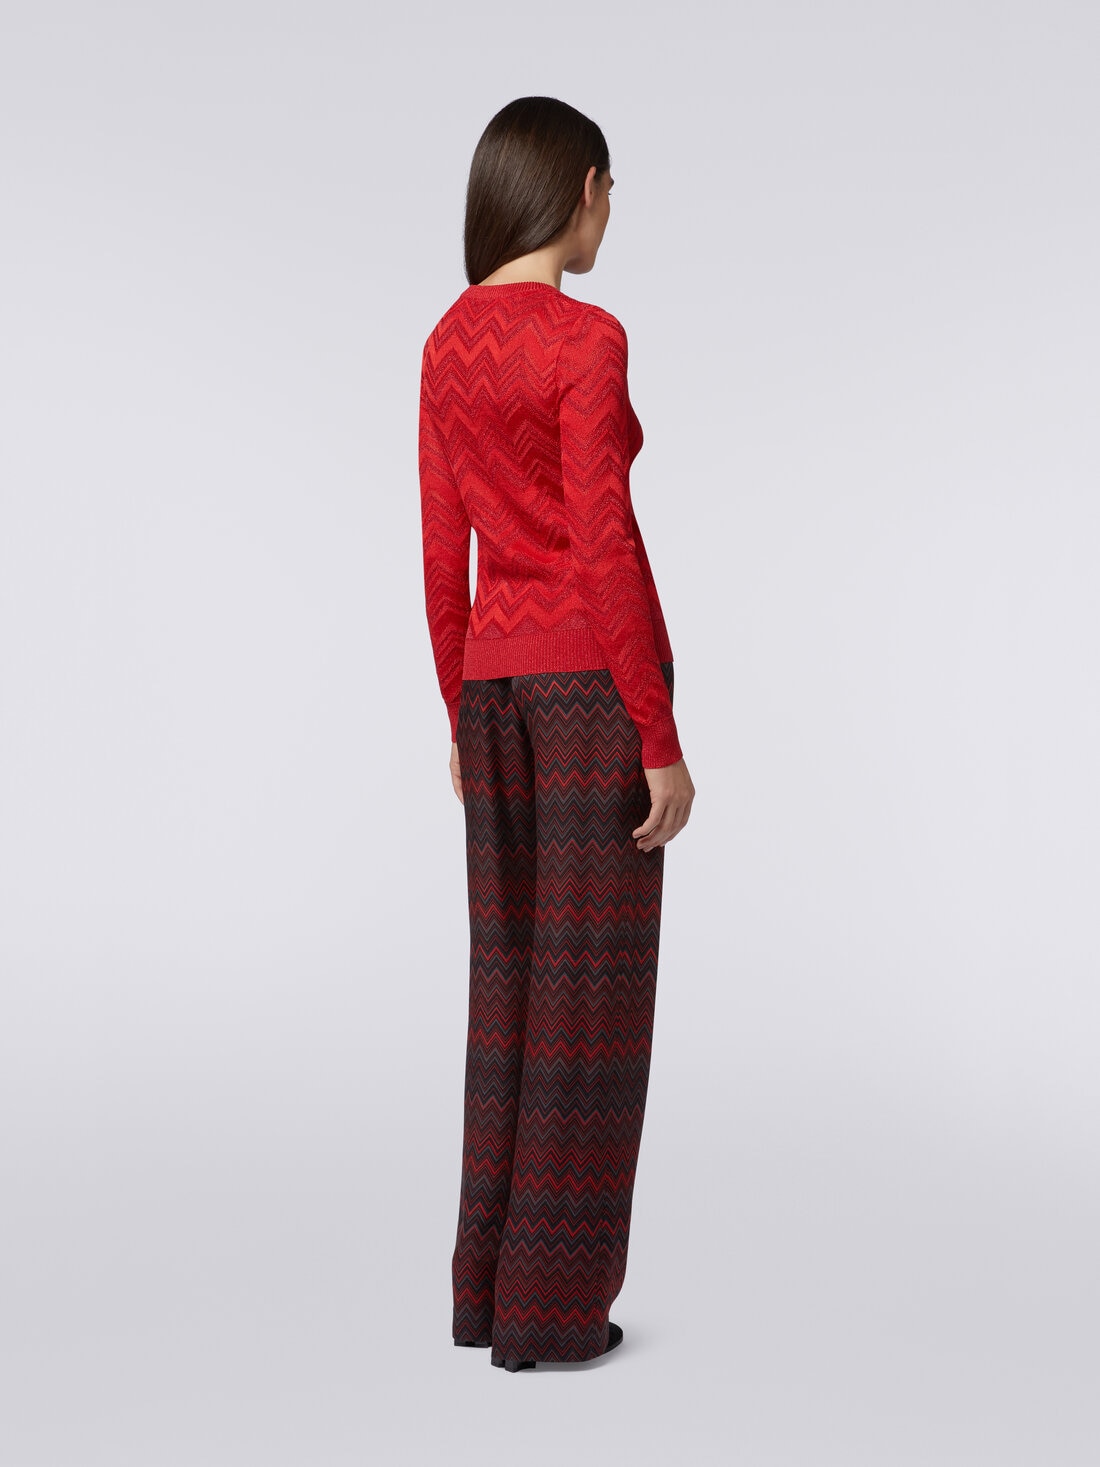 Cardigan in tonal zigzag knit with lurex, Red  - DS24SM0SBK034J81756 - 3